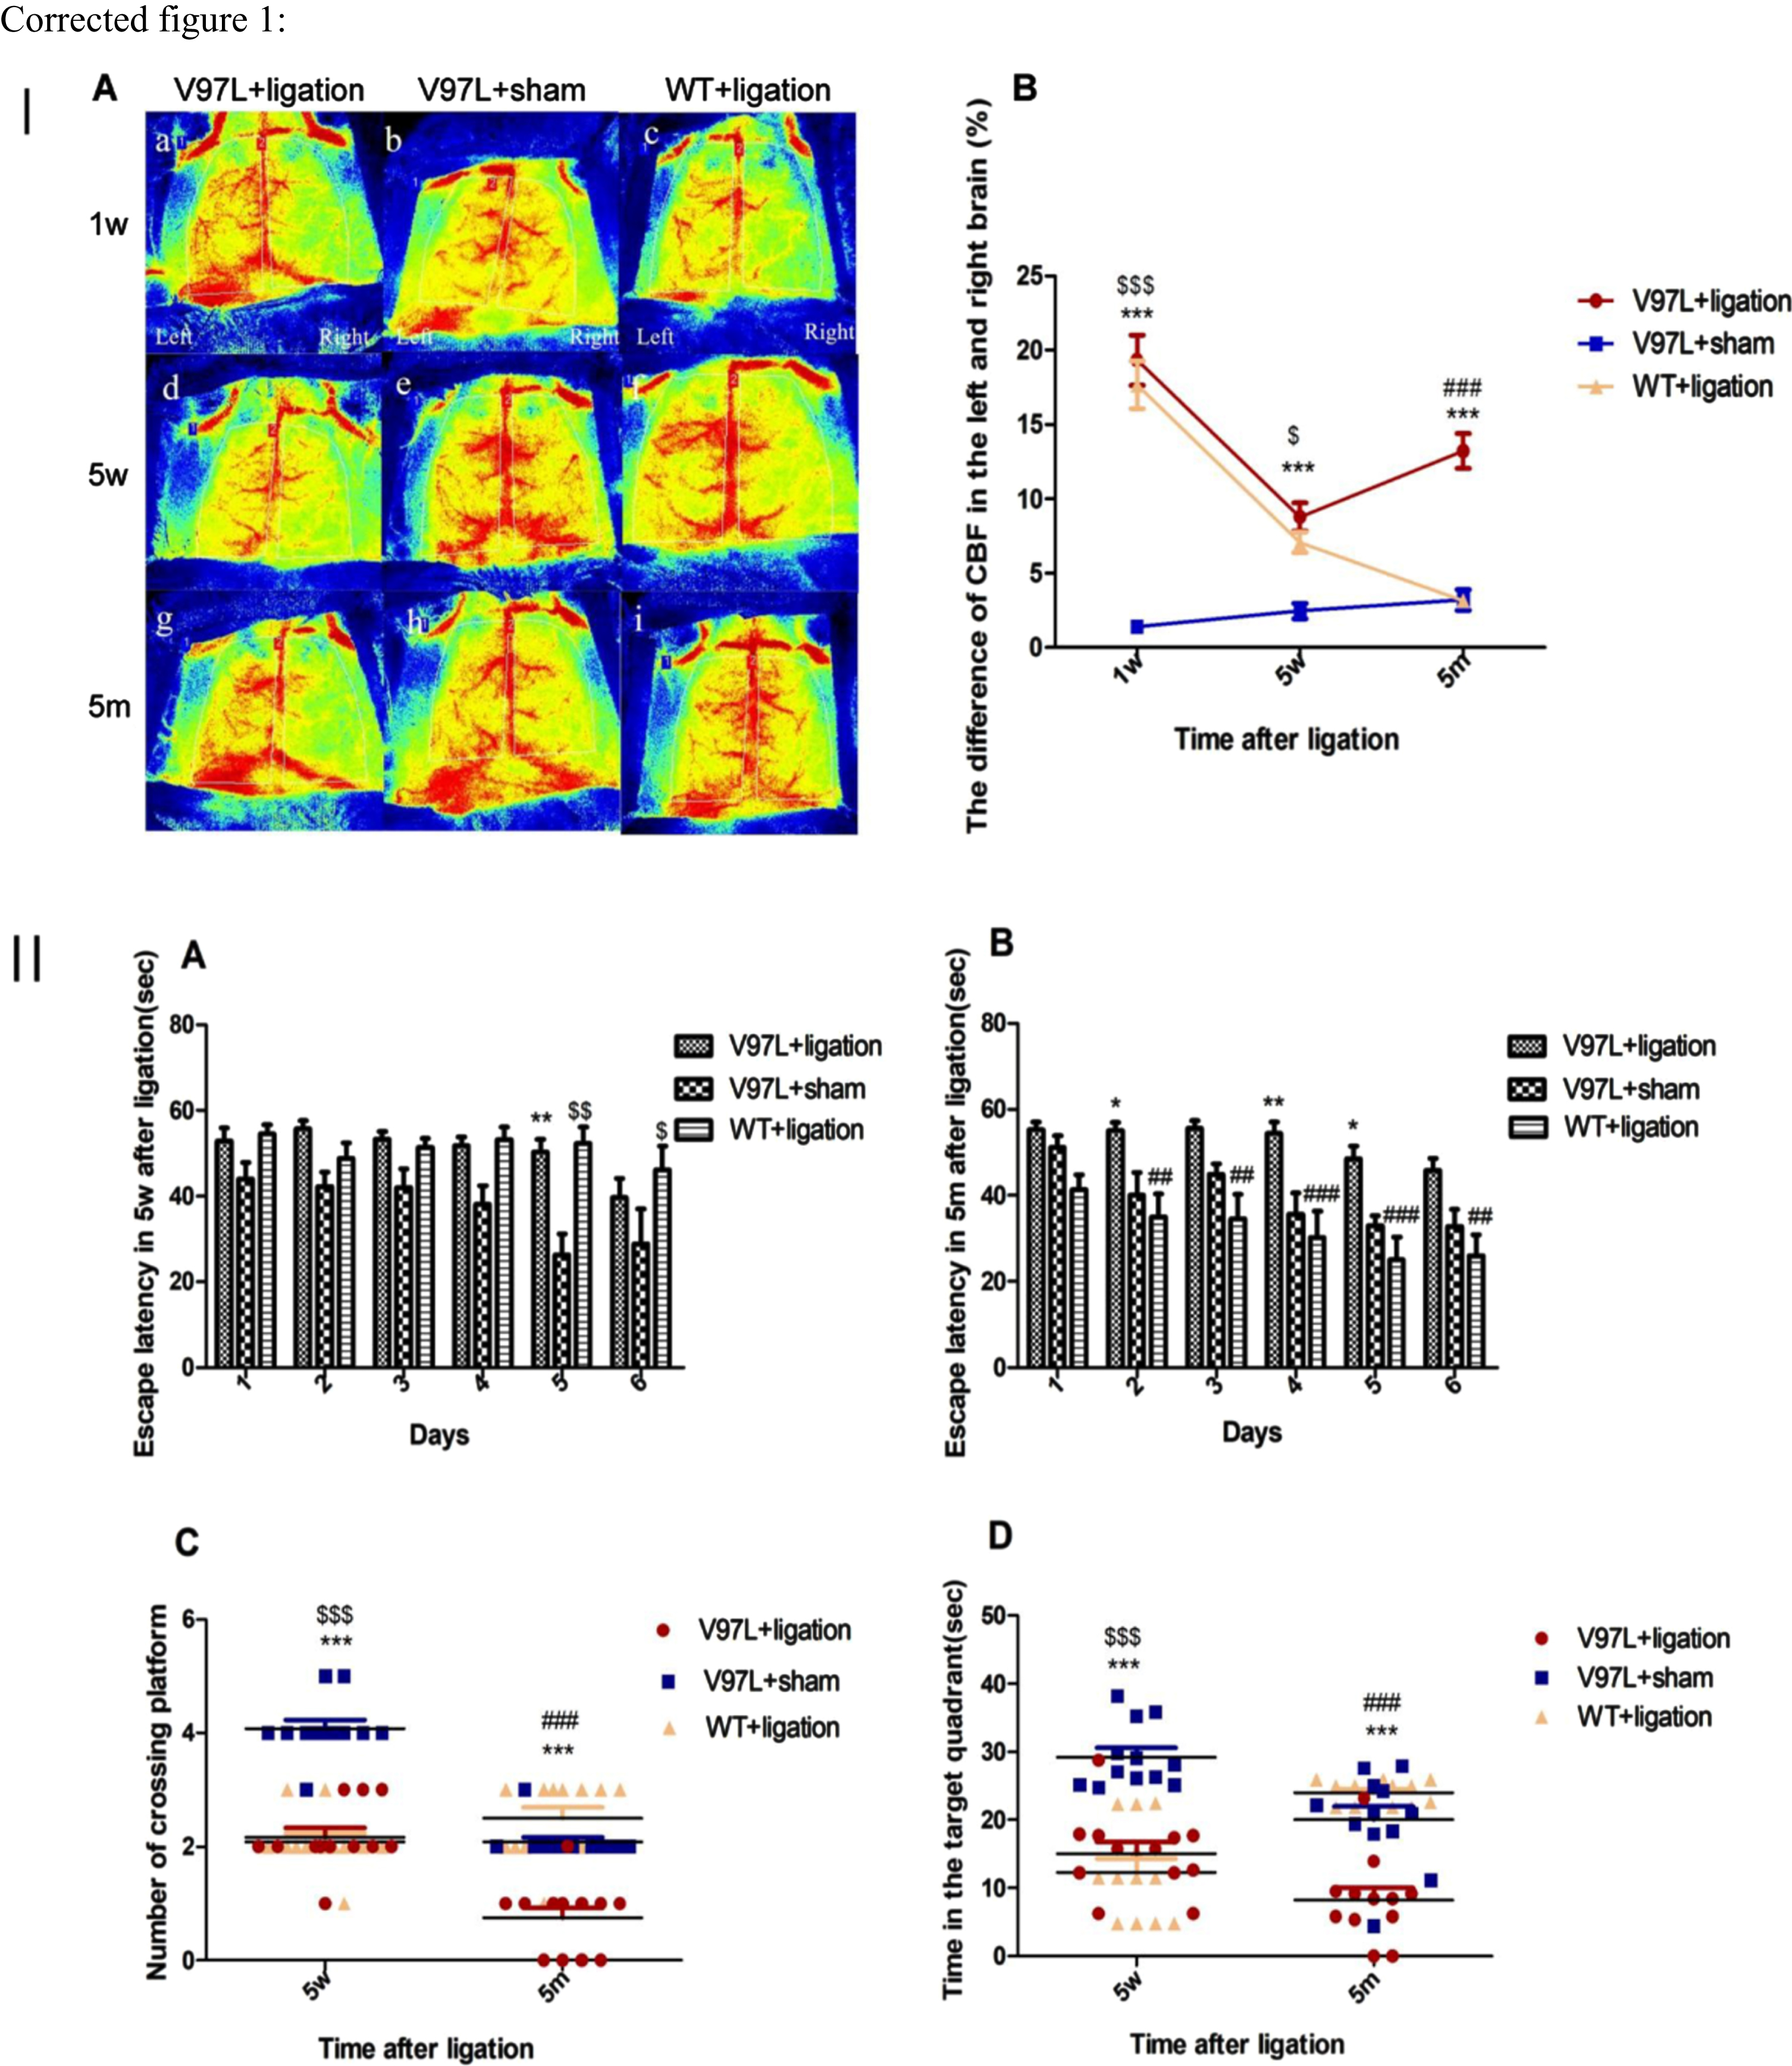 A mouse model of Alzheimer’s disease with chronic cerebral hypoperfusion was successfully developed, as indicated by disrupted cognitive function. Part I shows that (A) PS1V97L + ligation, PS1V97L + sham, and wild type (WT) + ligation mice were subjected to laser speckle blood flow monitoring to determine their cerebral blood flow (CBF) at 1 week, 5 weeks, and 5 months after surgery. B) The difference in CBF between the left and right hemispheres of the brain. Data are shown as mean±SEM (n = 12 mice/group). Part II. A, B) Escape latency in the Morris water maze during training at 5 weeks and 5 months after surgery in PS1V97L + ligation, PS1V97L + sham, and WT+ ligation mice. C) The number of platform location crossings in the probe trial at 5 weeks and 5 months after surgery. D) The time spent in the target quadrant at 5 weeks and 5 months after surgery. Data are shown as mean±SEM (n = 12 mice/group). V97L + ligation versus V97L + sham: *p < 0.05, **p < 0.01, ***p < 0.001; V97L + ligation versus WT+ ligation: #p < 0.05, ##p < 0.01, ###p < 0.001; V97L + sham versus WT+ ligation: $p < 0.05, $$p < 0.01, $$$p < 0.001.